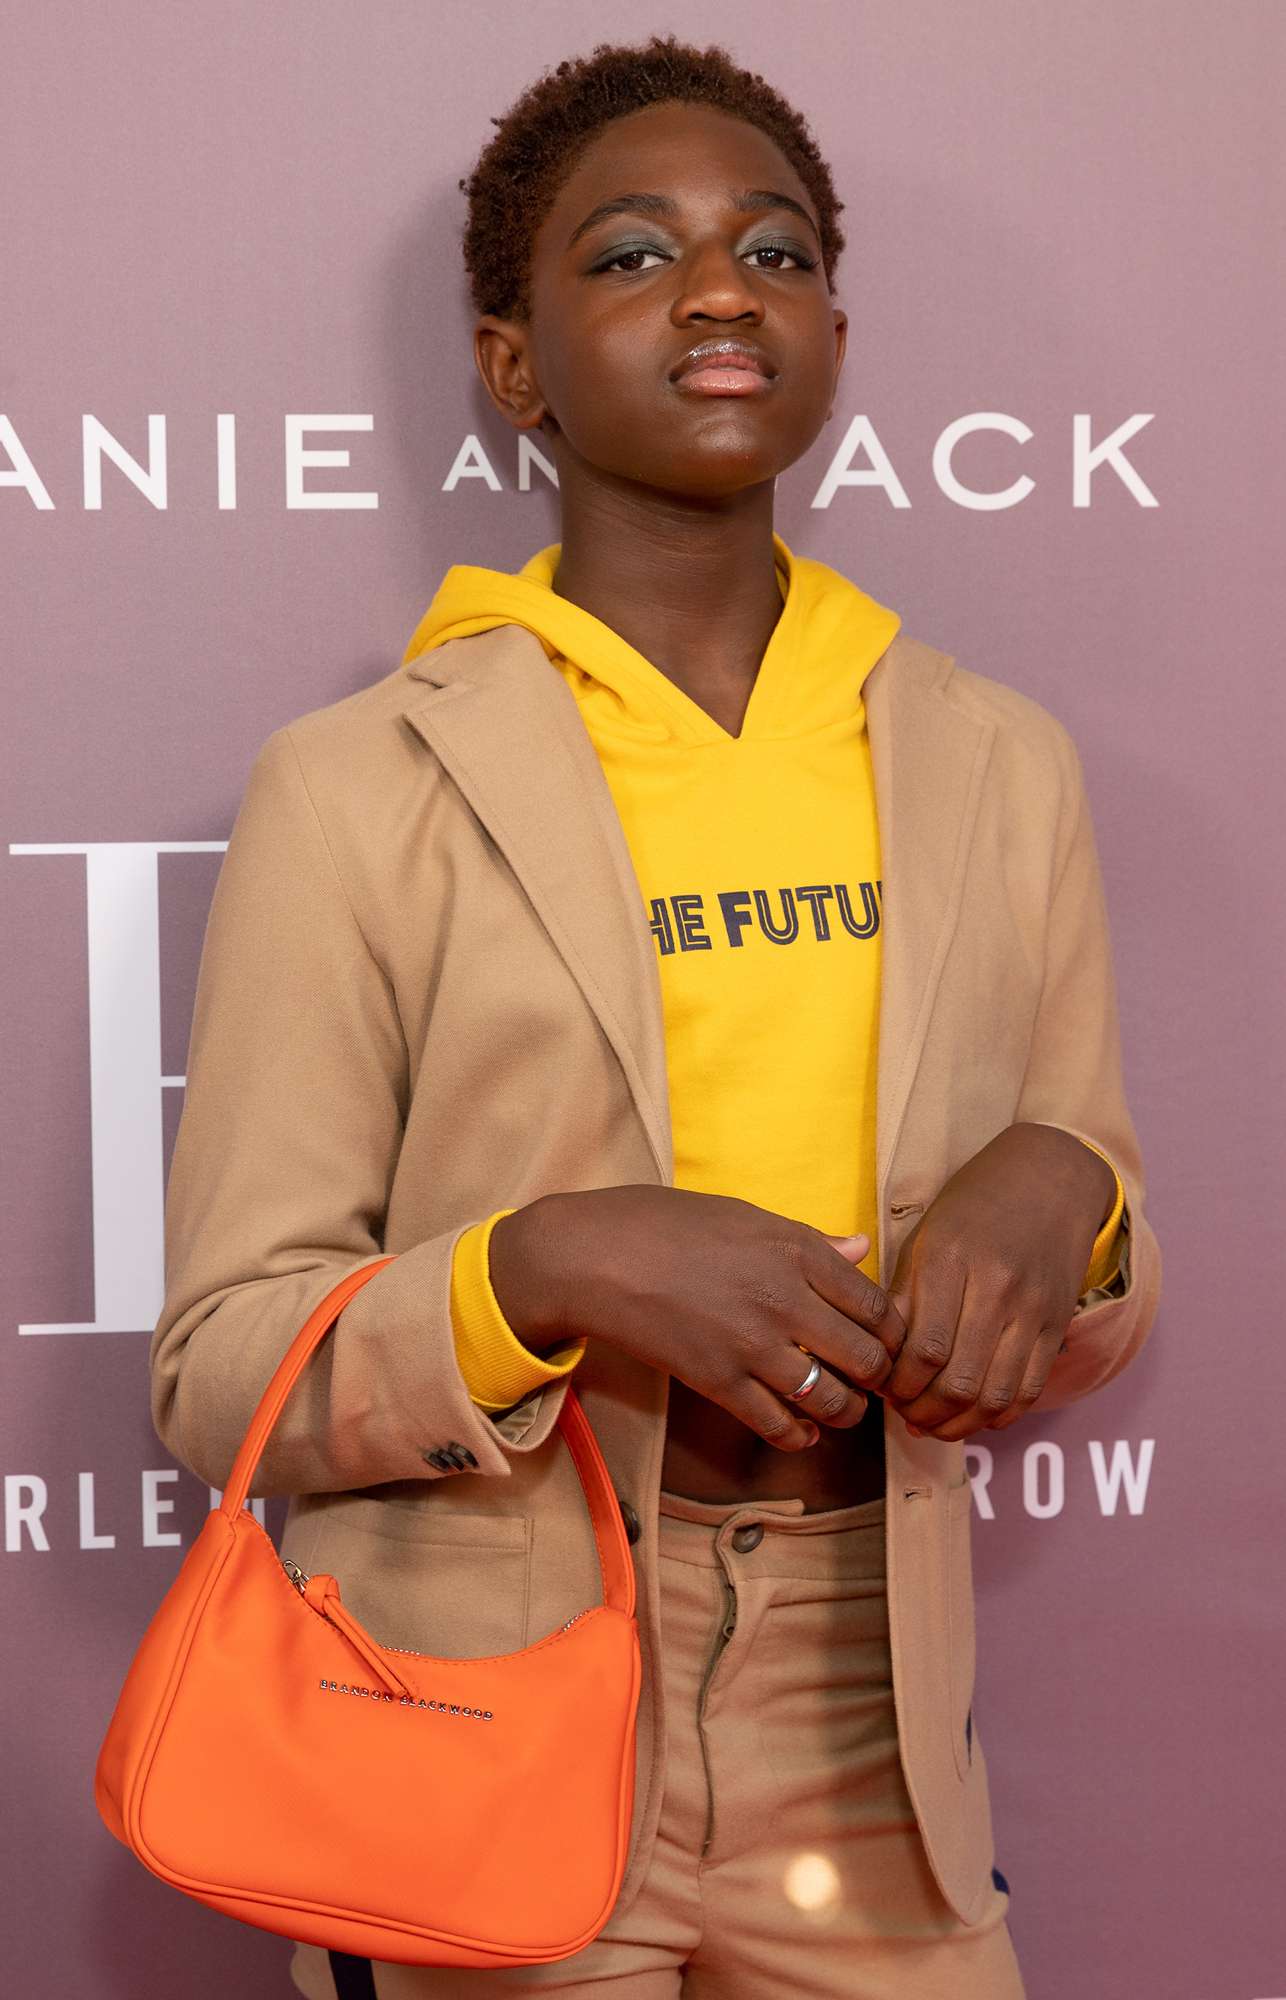 Zaya Wade attends Harlem's Fashion Row x Janie and Jack Los Angeles Fashion presentation at Gracias Madre on October 16, 2021 in West Hollywood, California